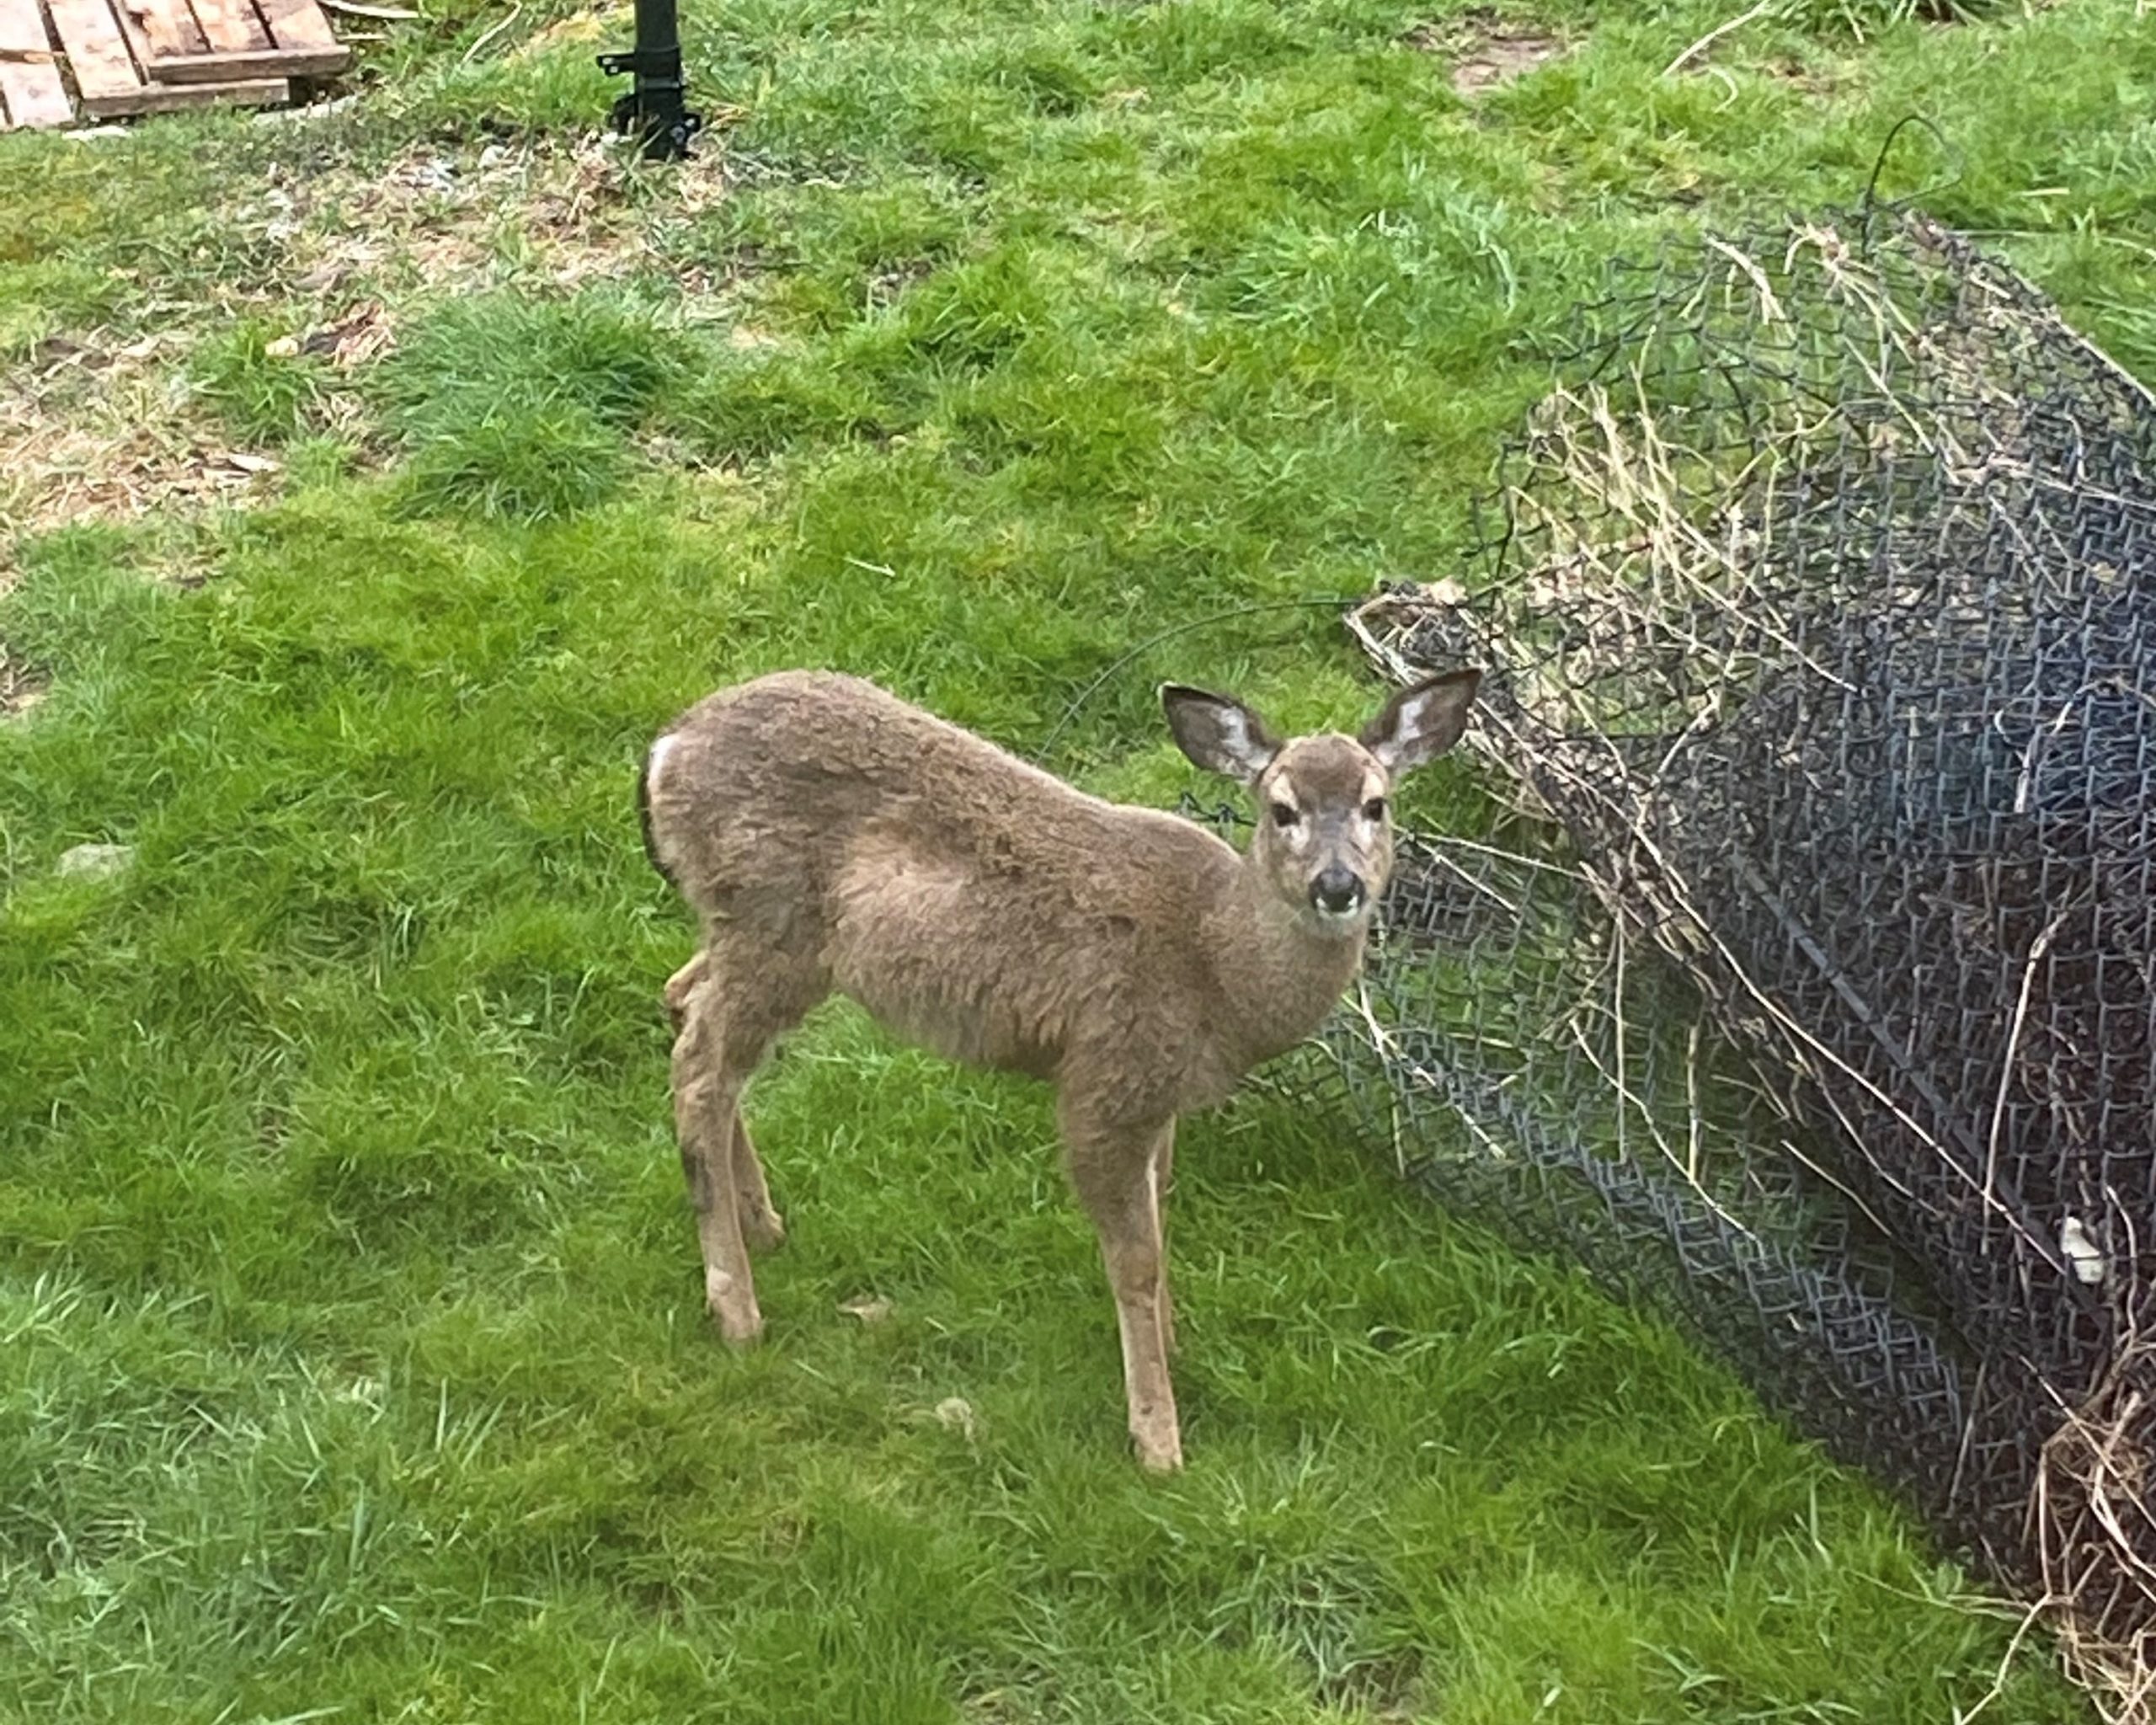 A brown deer standing looking into the camera in a yard.